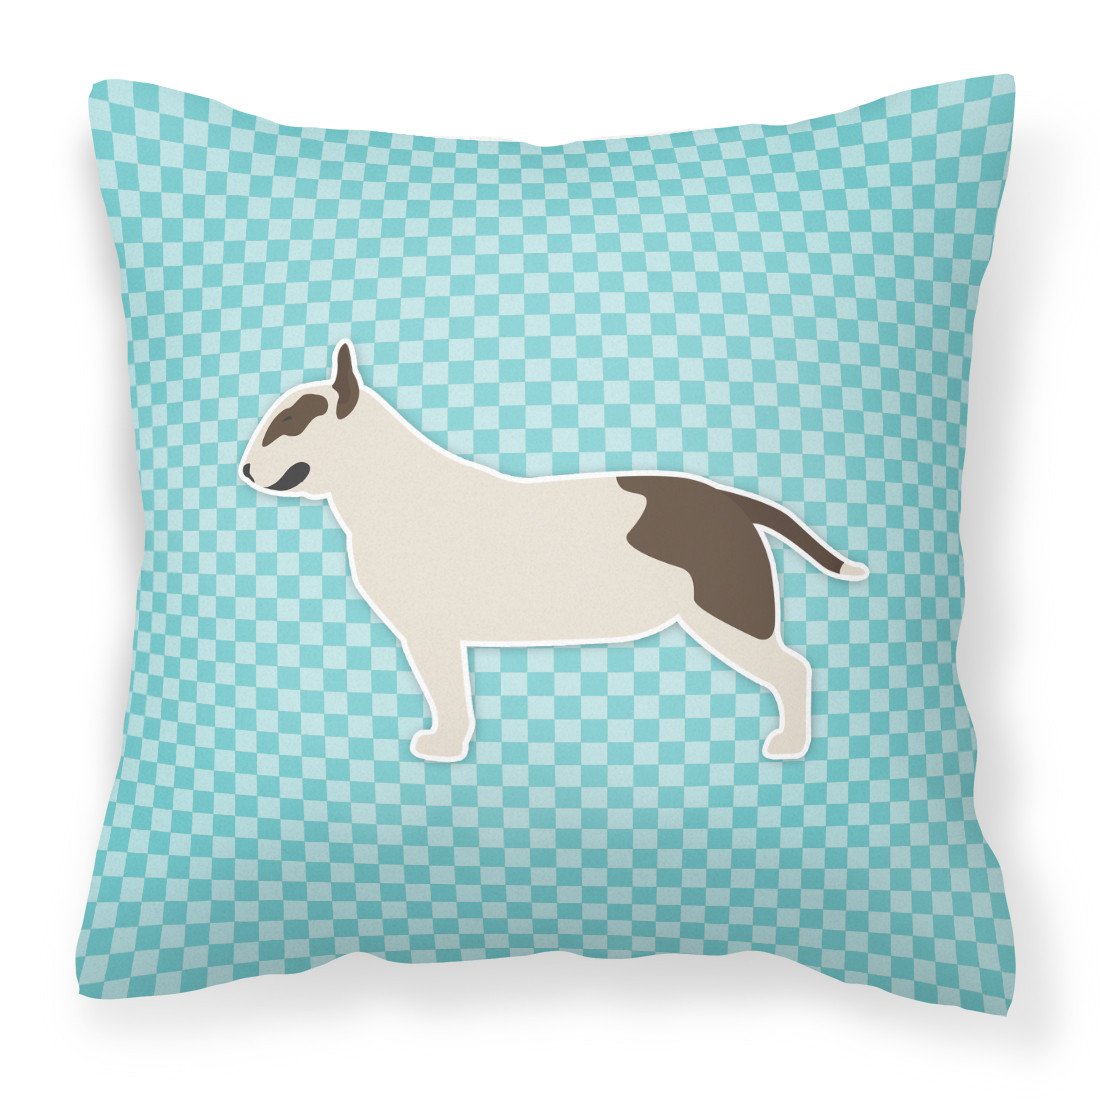 Bull Terrier Checkerboard Blue Fabric Decorative Pillow BB3778PW1818 by Caroline's Treasures